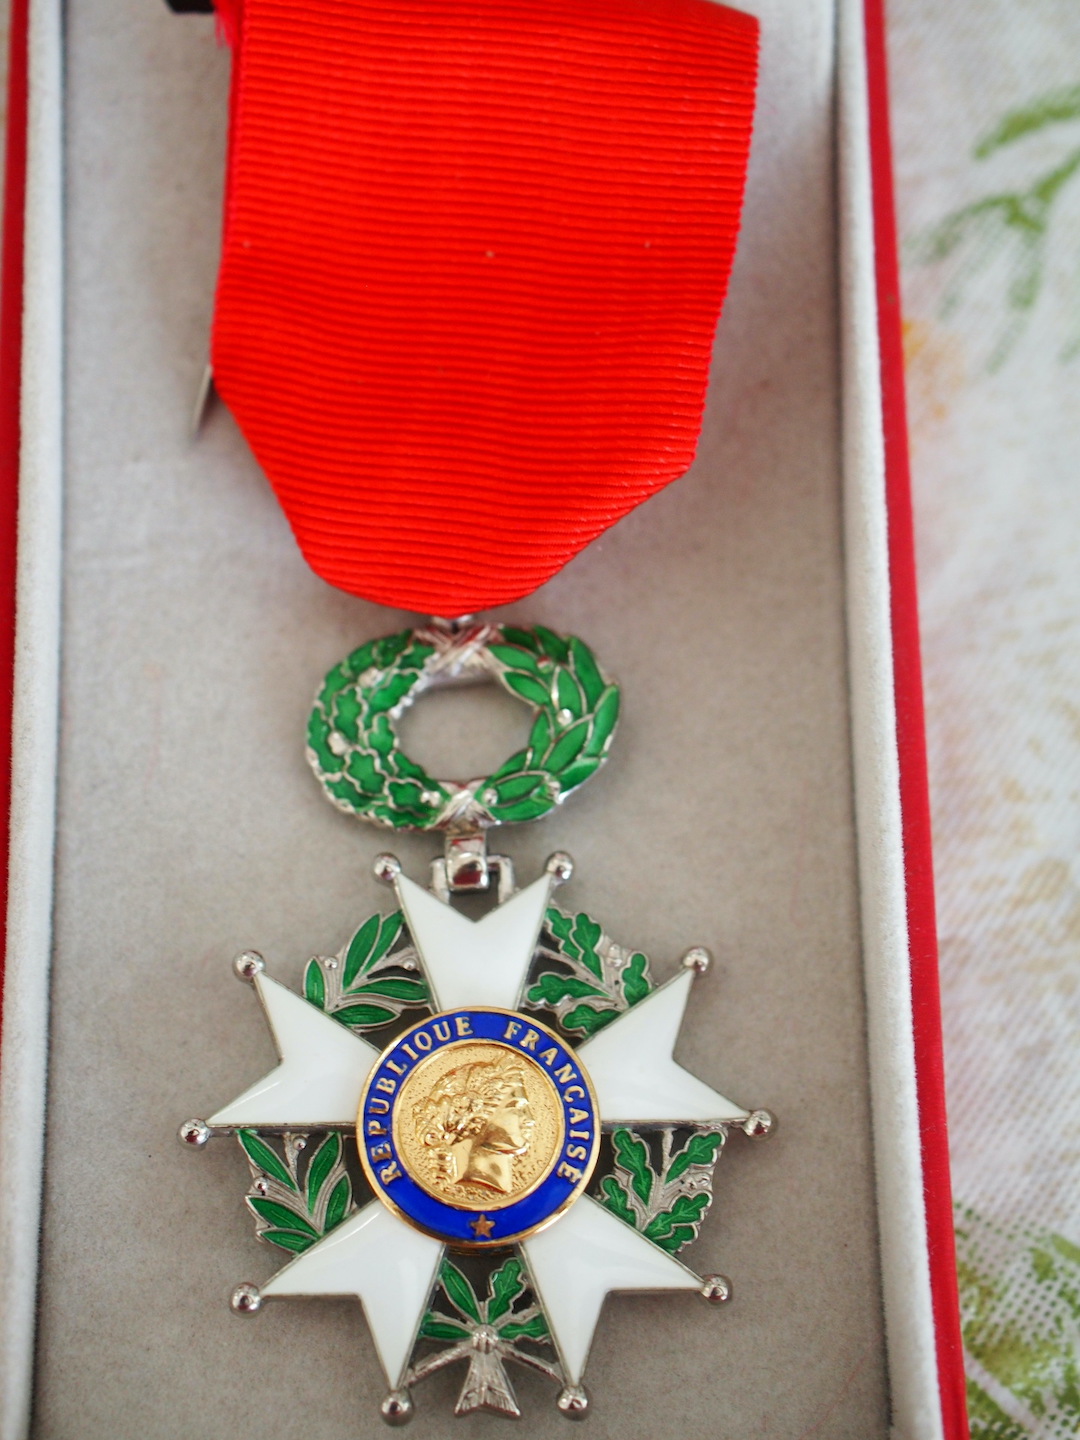 This medal from France represented the National Order of the Legion of Honor (Ordre national de la Légion d'honneur). It is the highest French order of merit, both military and civilian.